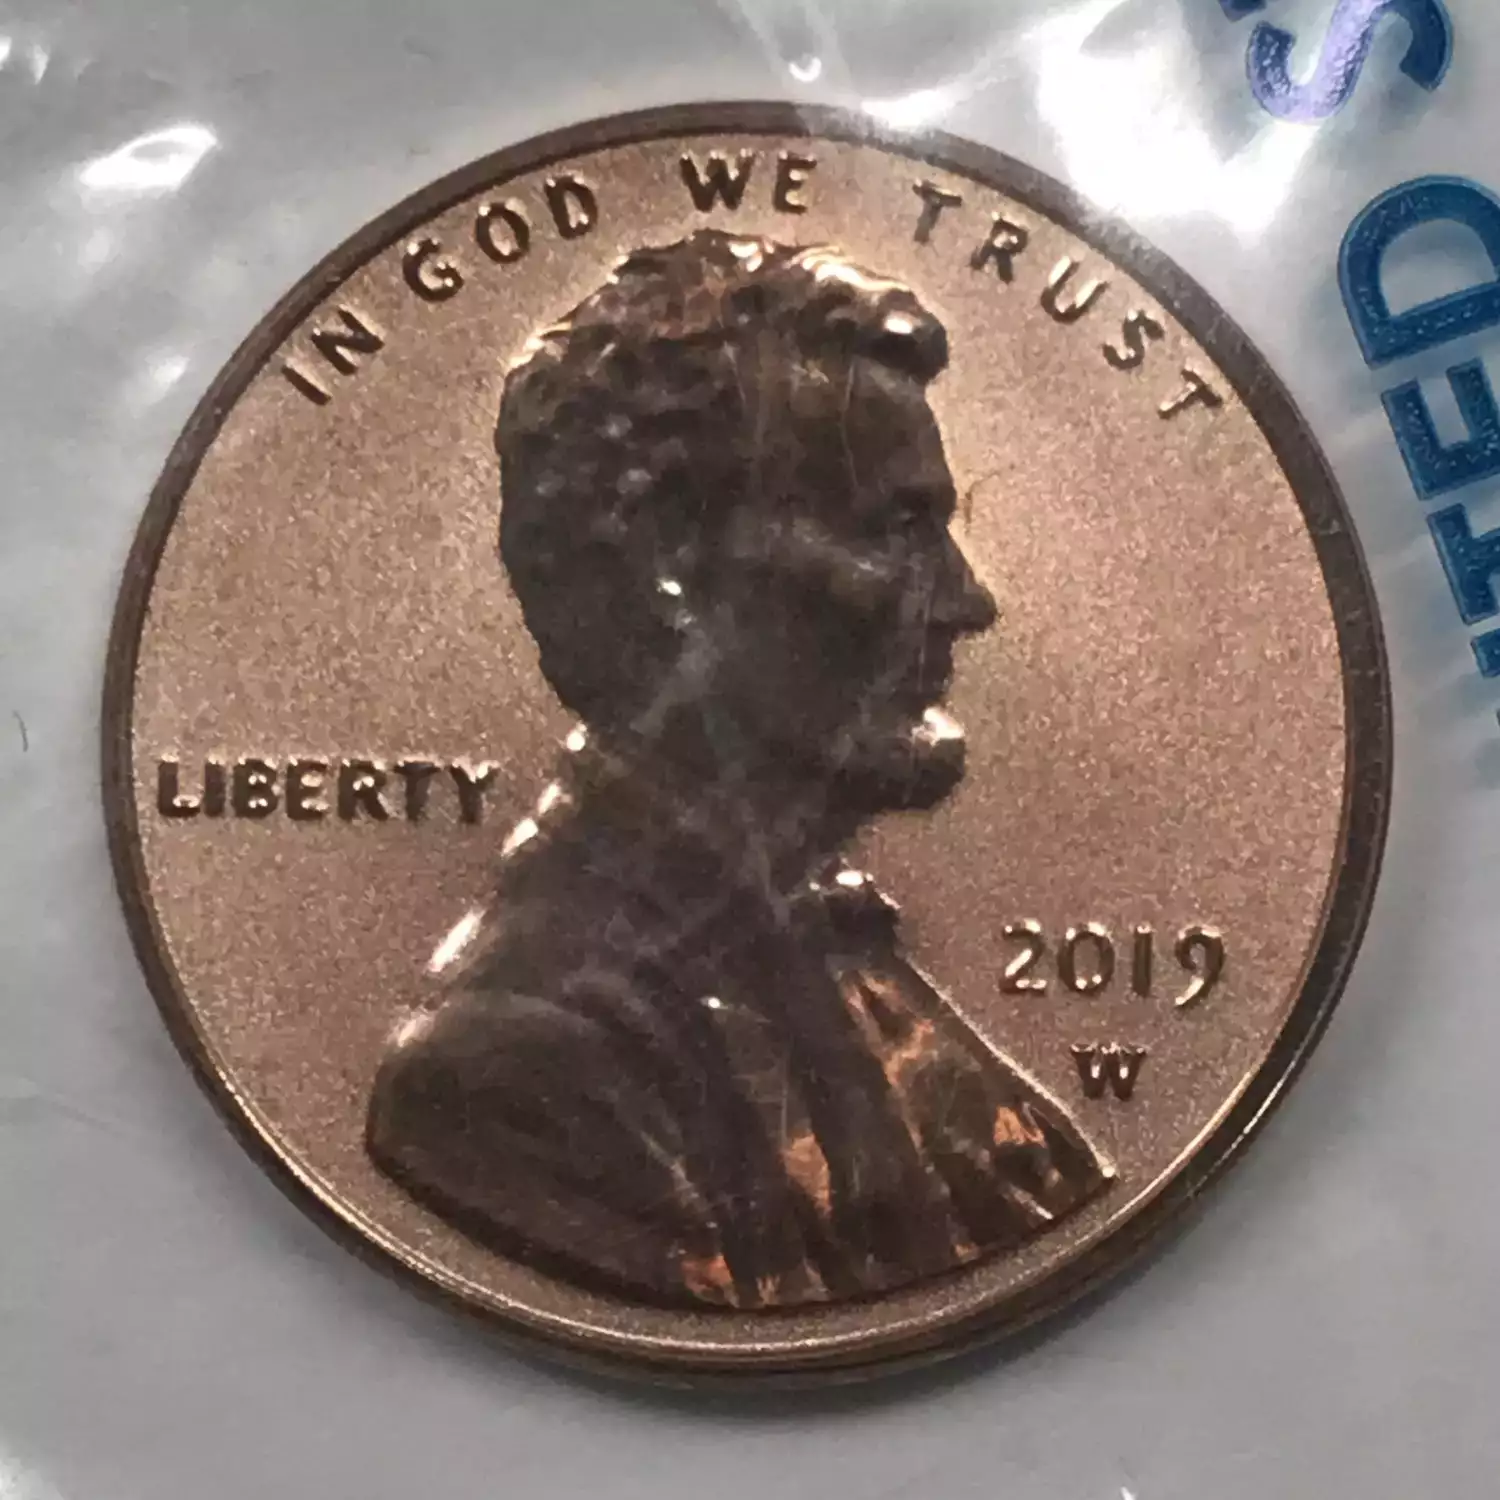 Your Lincoln penny could be worth $2,640 - the 'one cent reverse